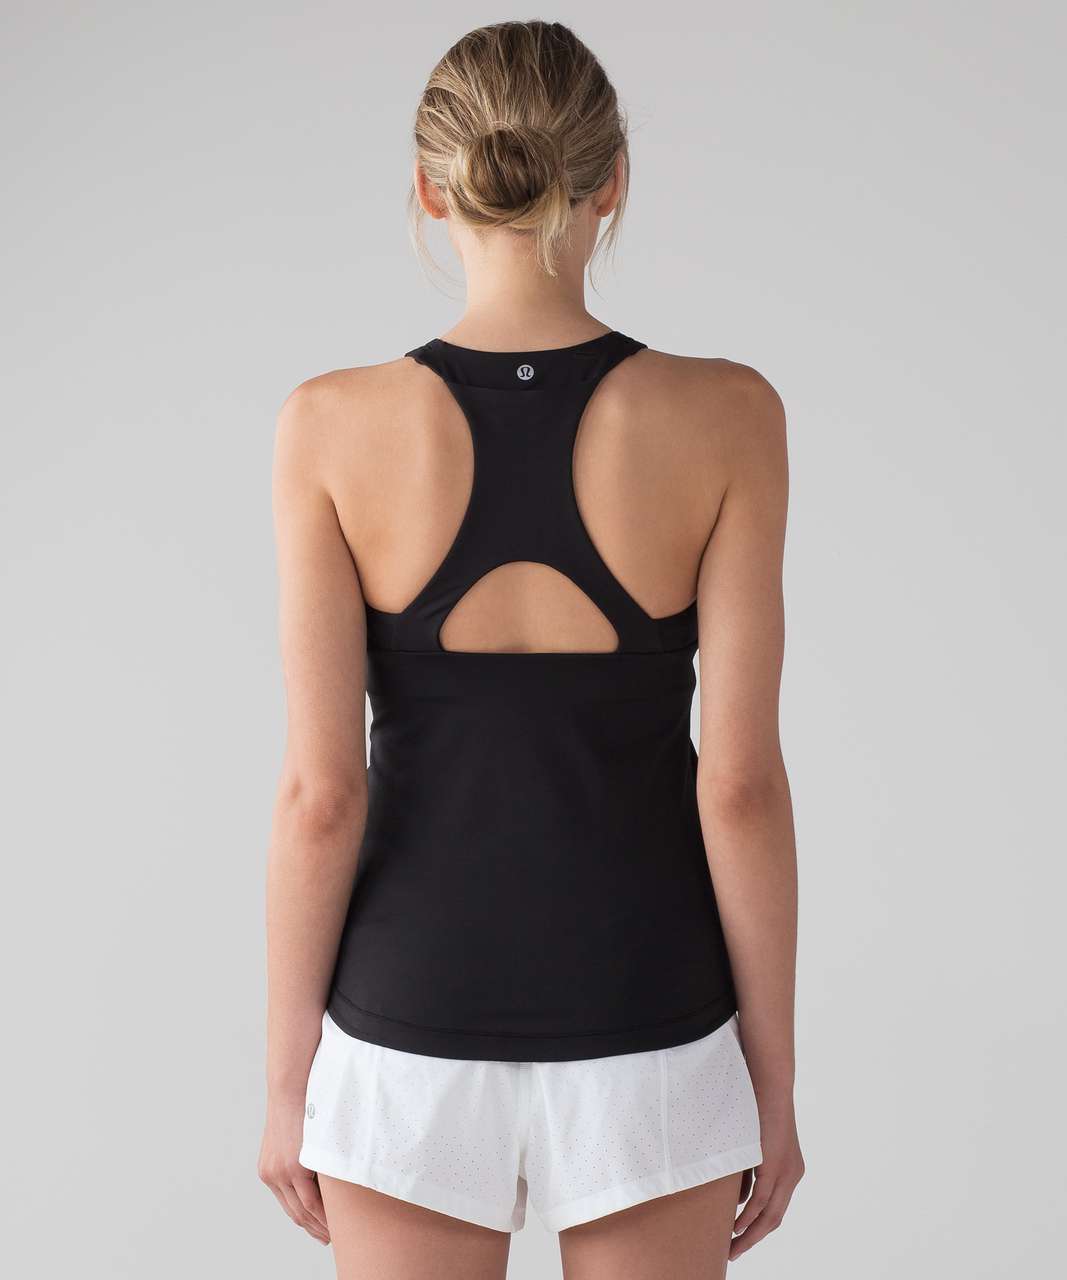 Black Lululemon Tank Top with built-in bra - Size 8 - clothing